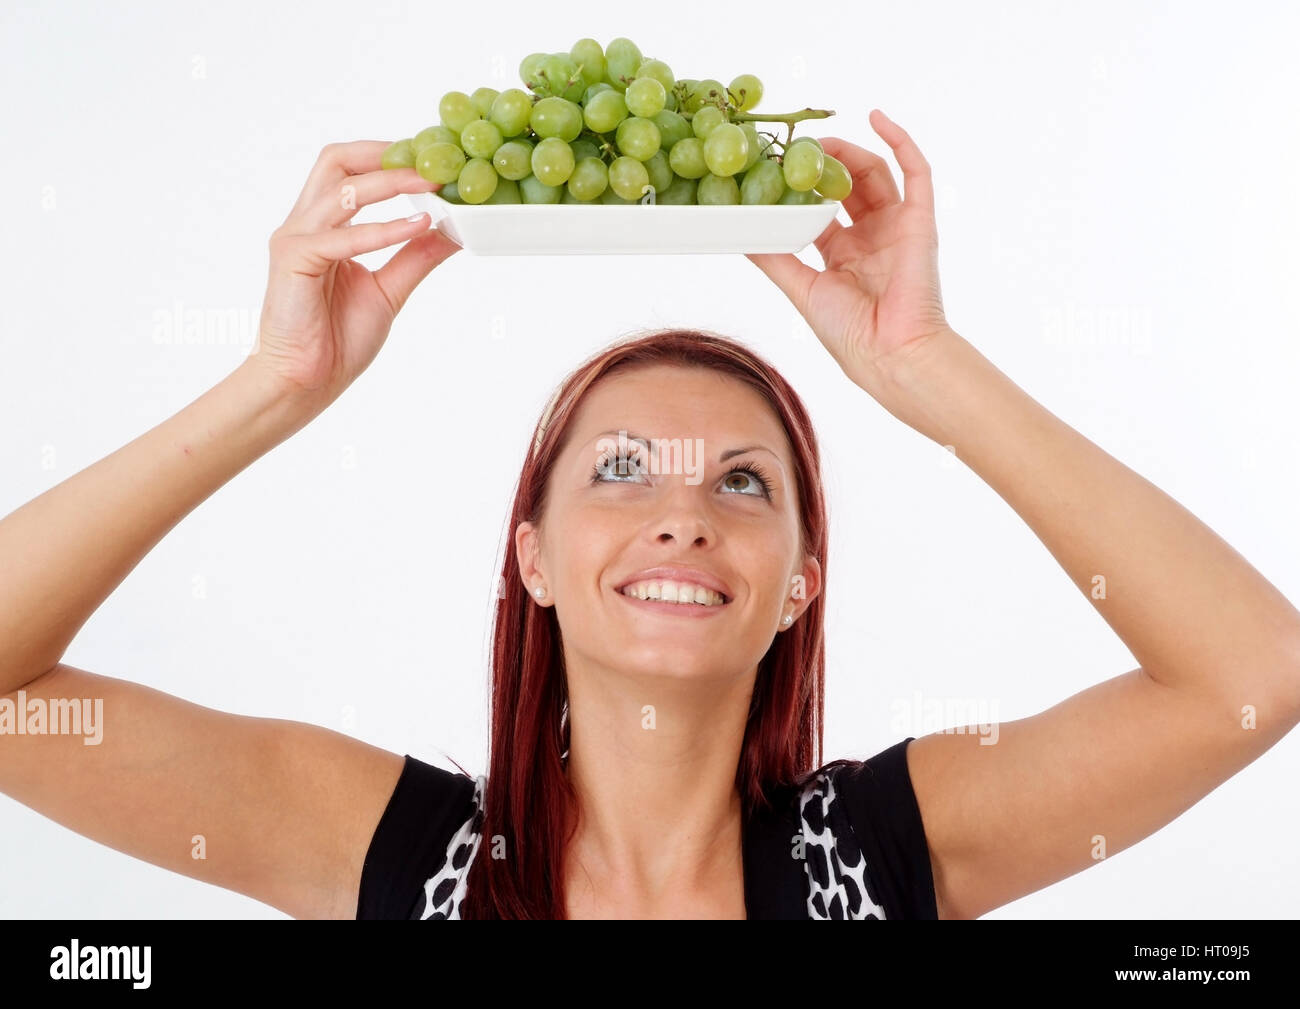 Junge Frau mit Weintrauben - young woman with grapes Stock Photo